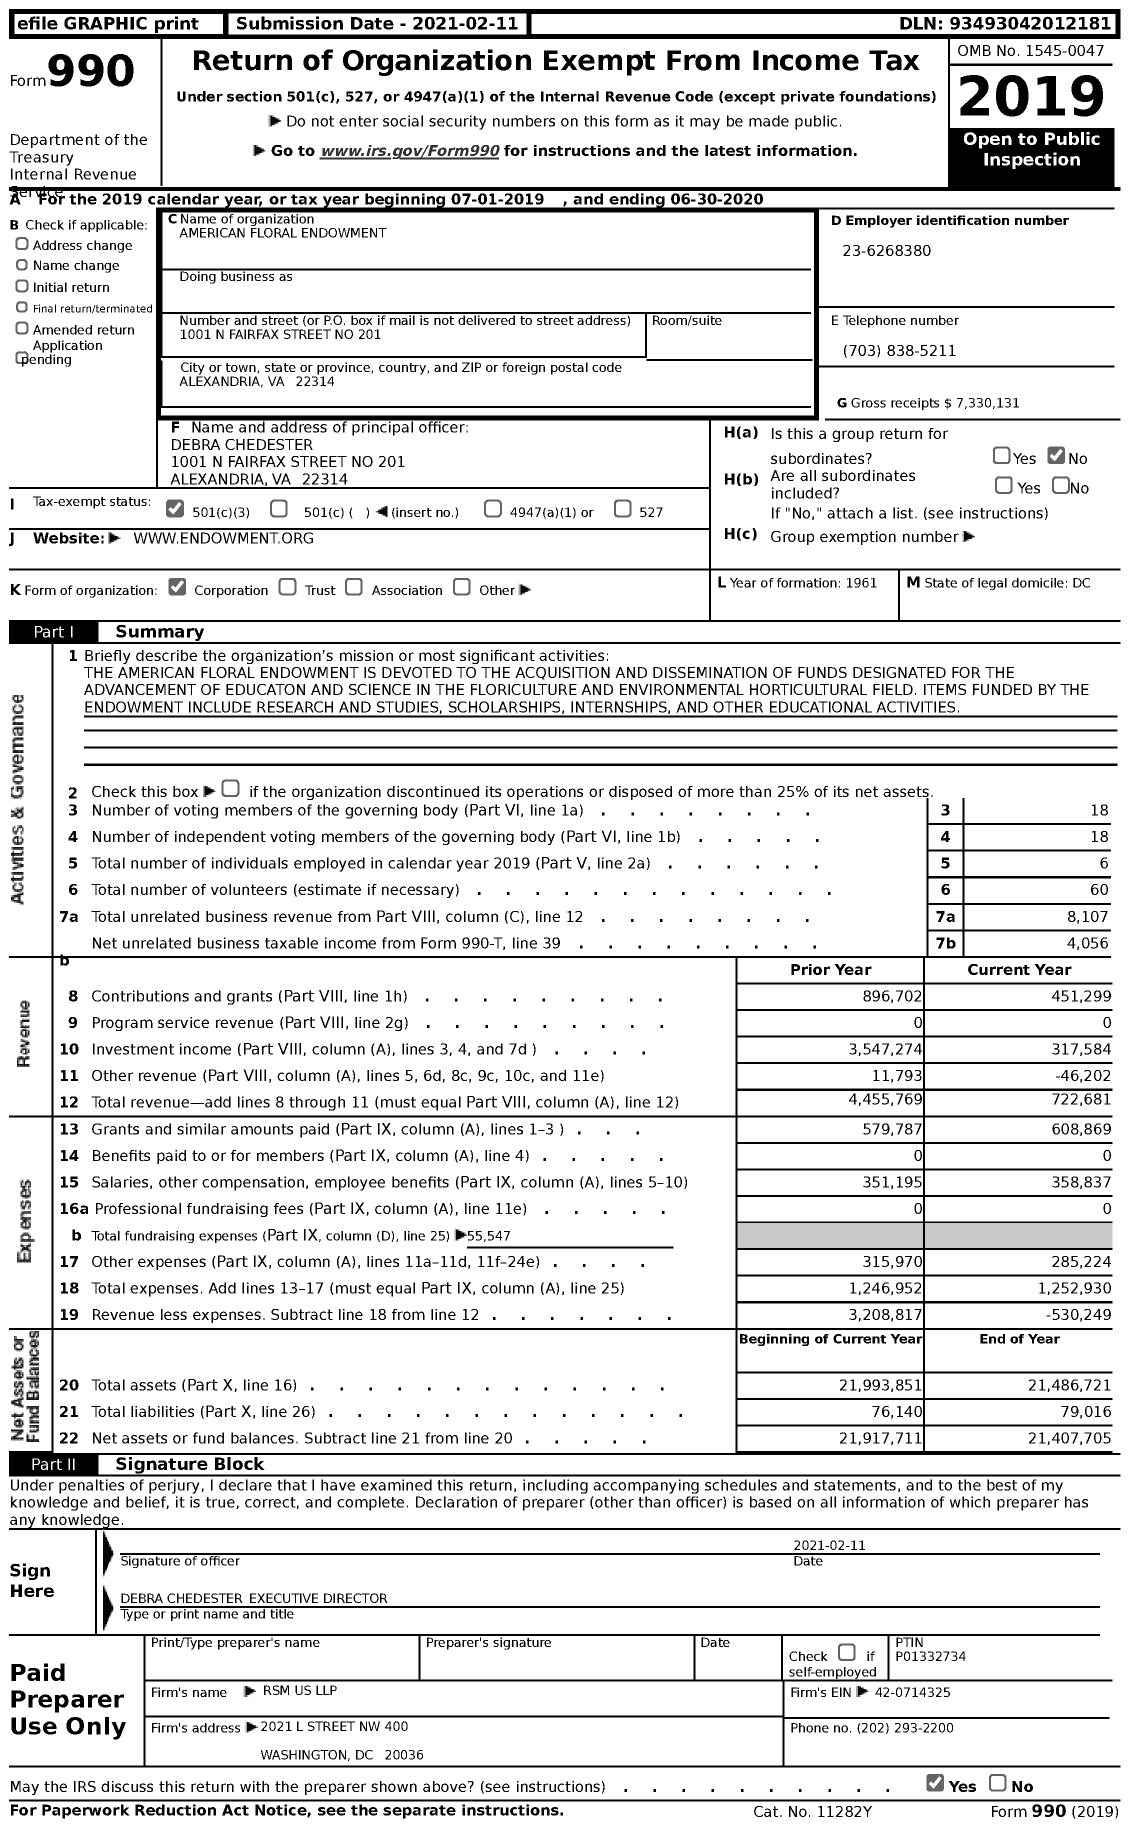 Image of first page of 2019 Form 990 for American Floral Endowment (AFE)